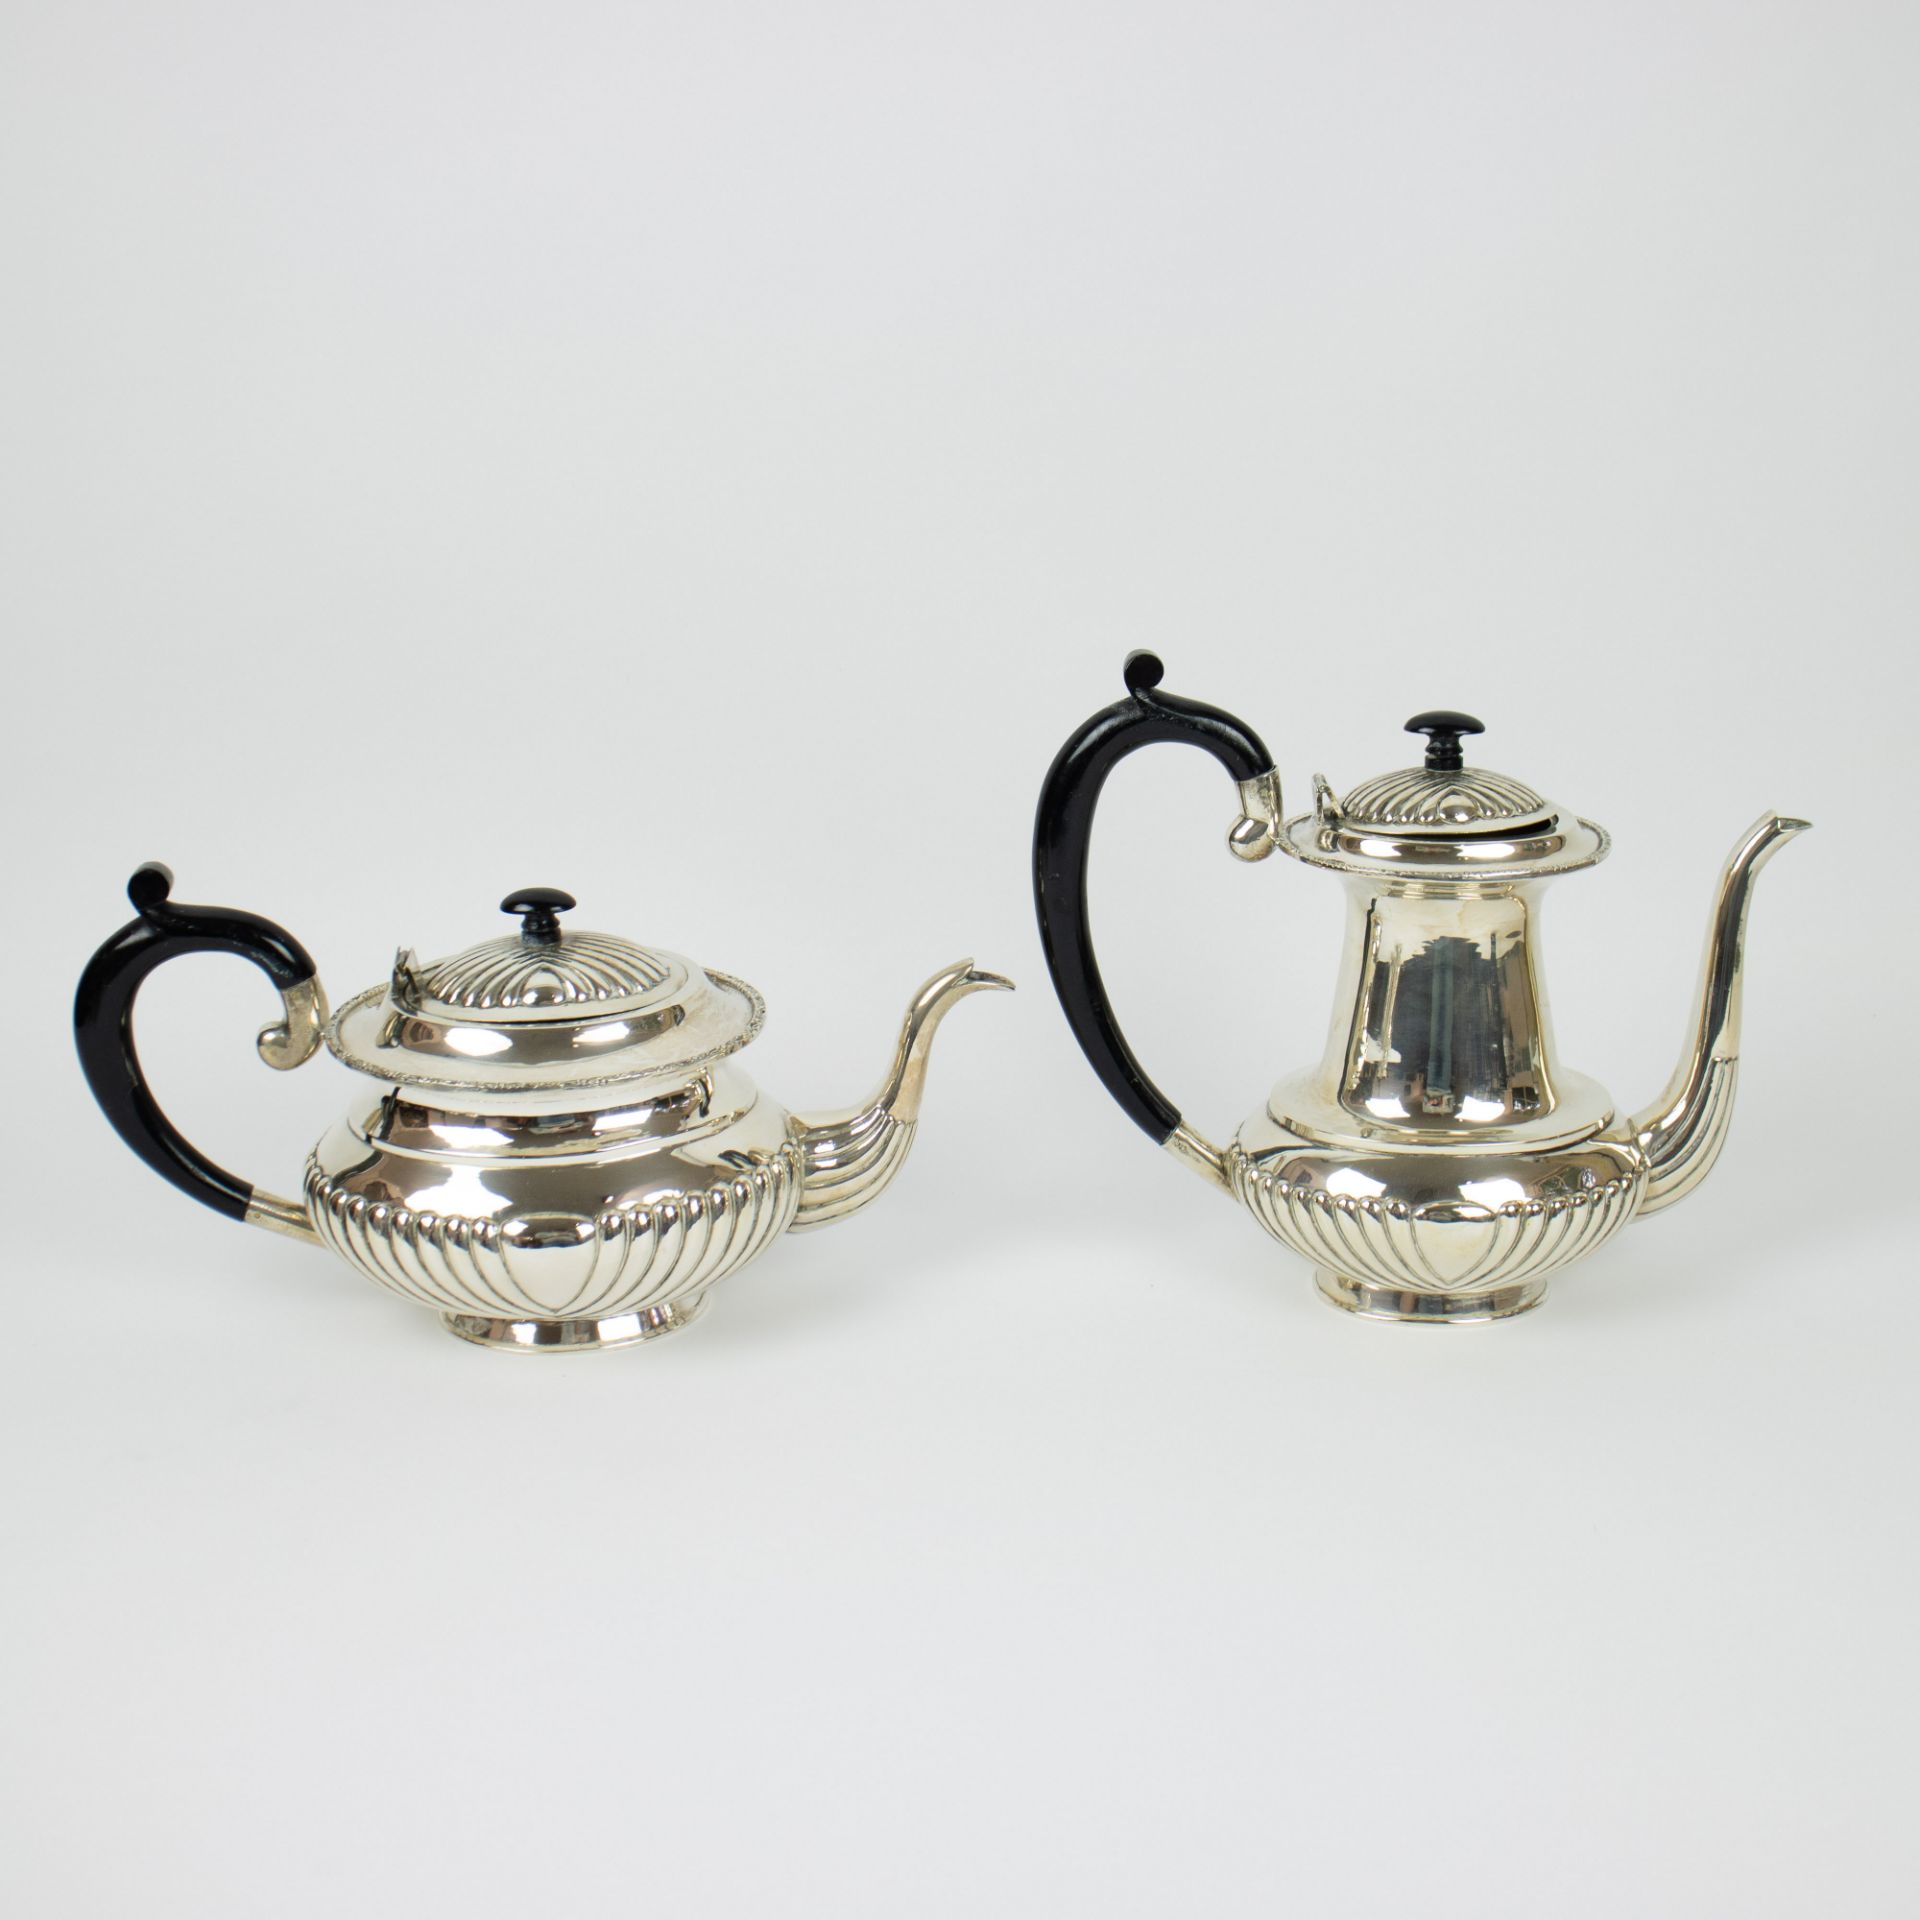 Silver coffee and tea set - Image 4 of 10